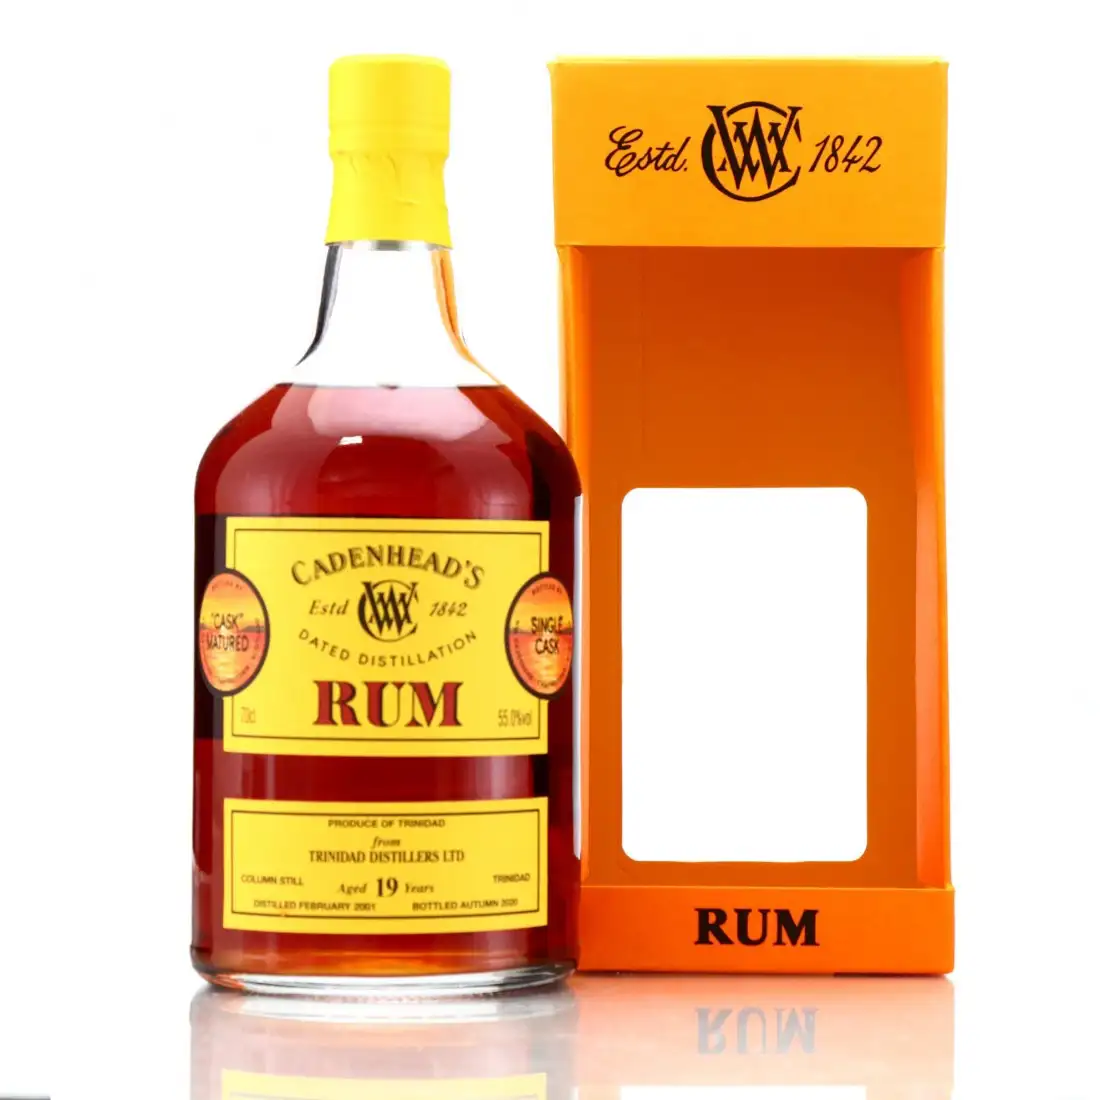 Image of the front of the bottle of the rum Trinidad Distillers LTD